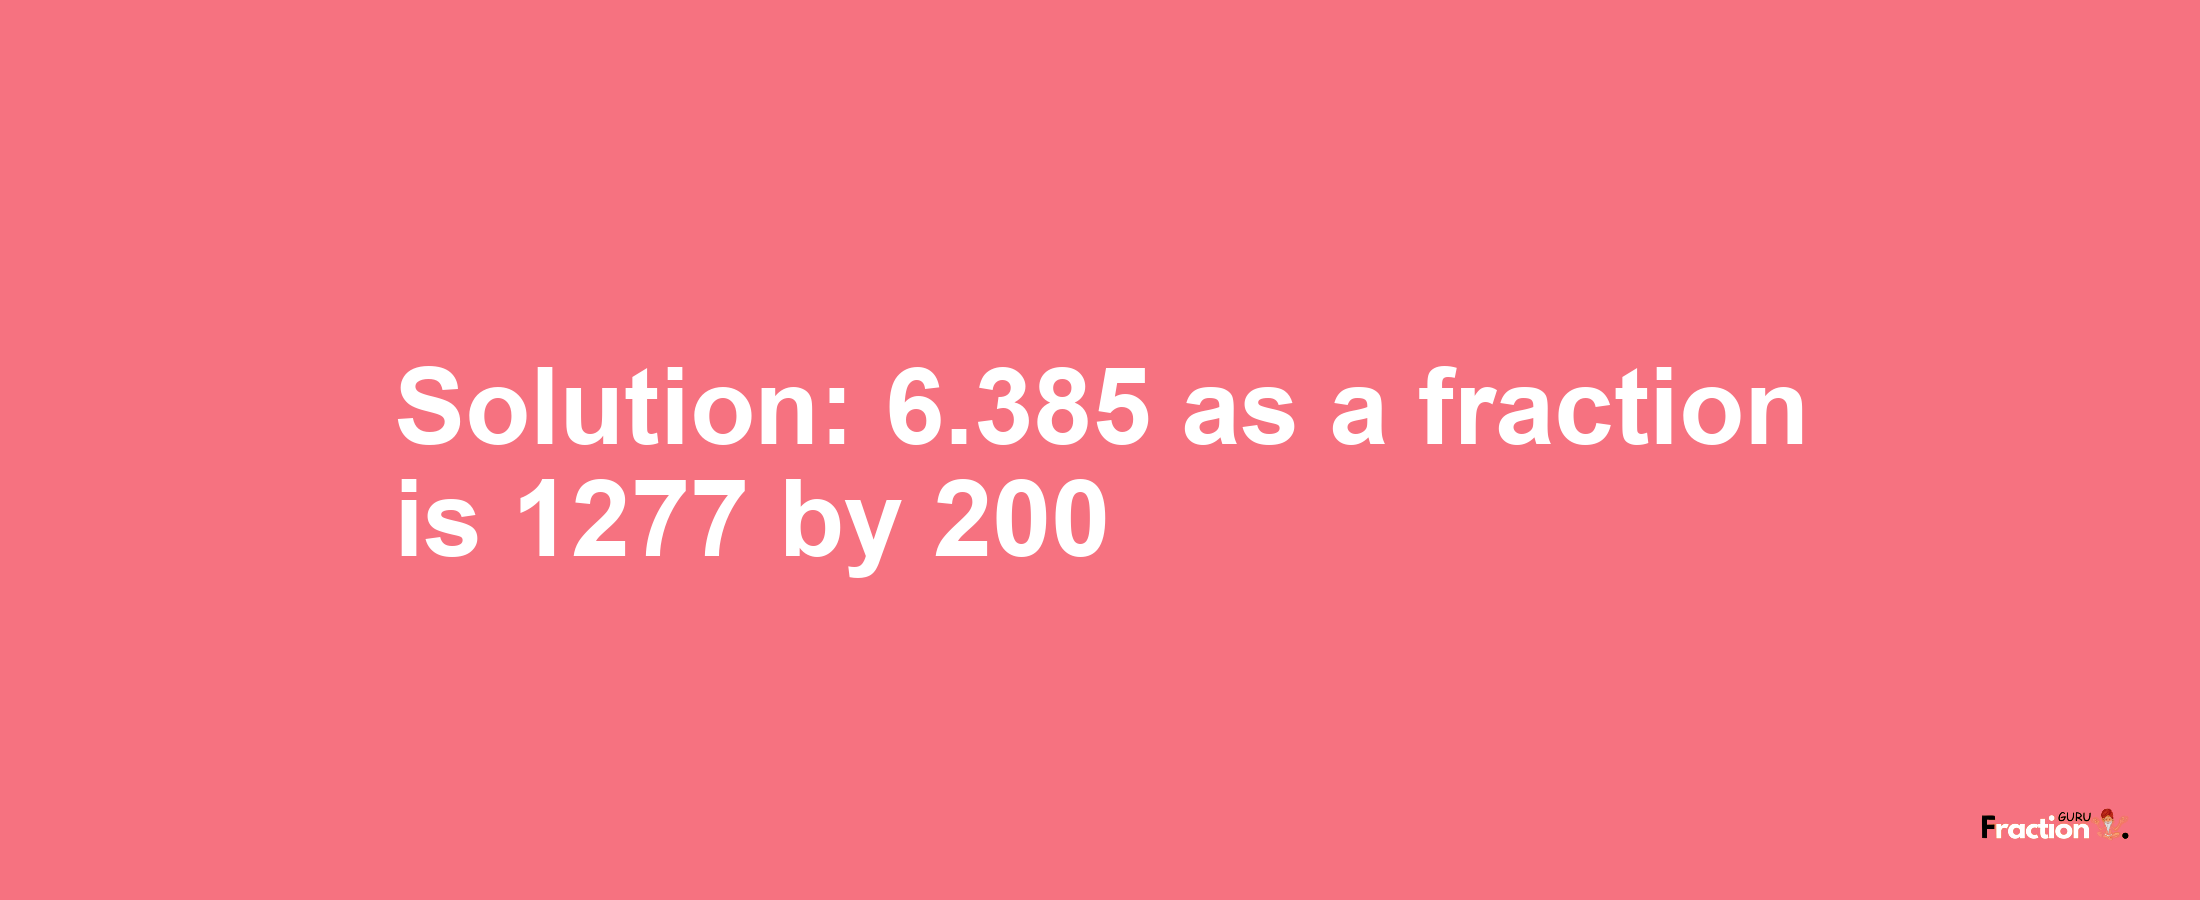 Solution:6.385 as a fraction is 1277/200